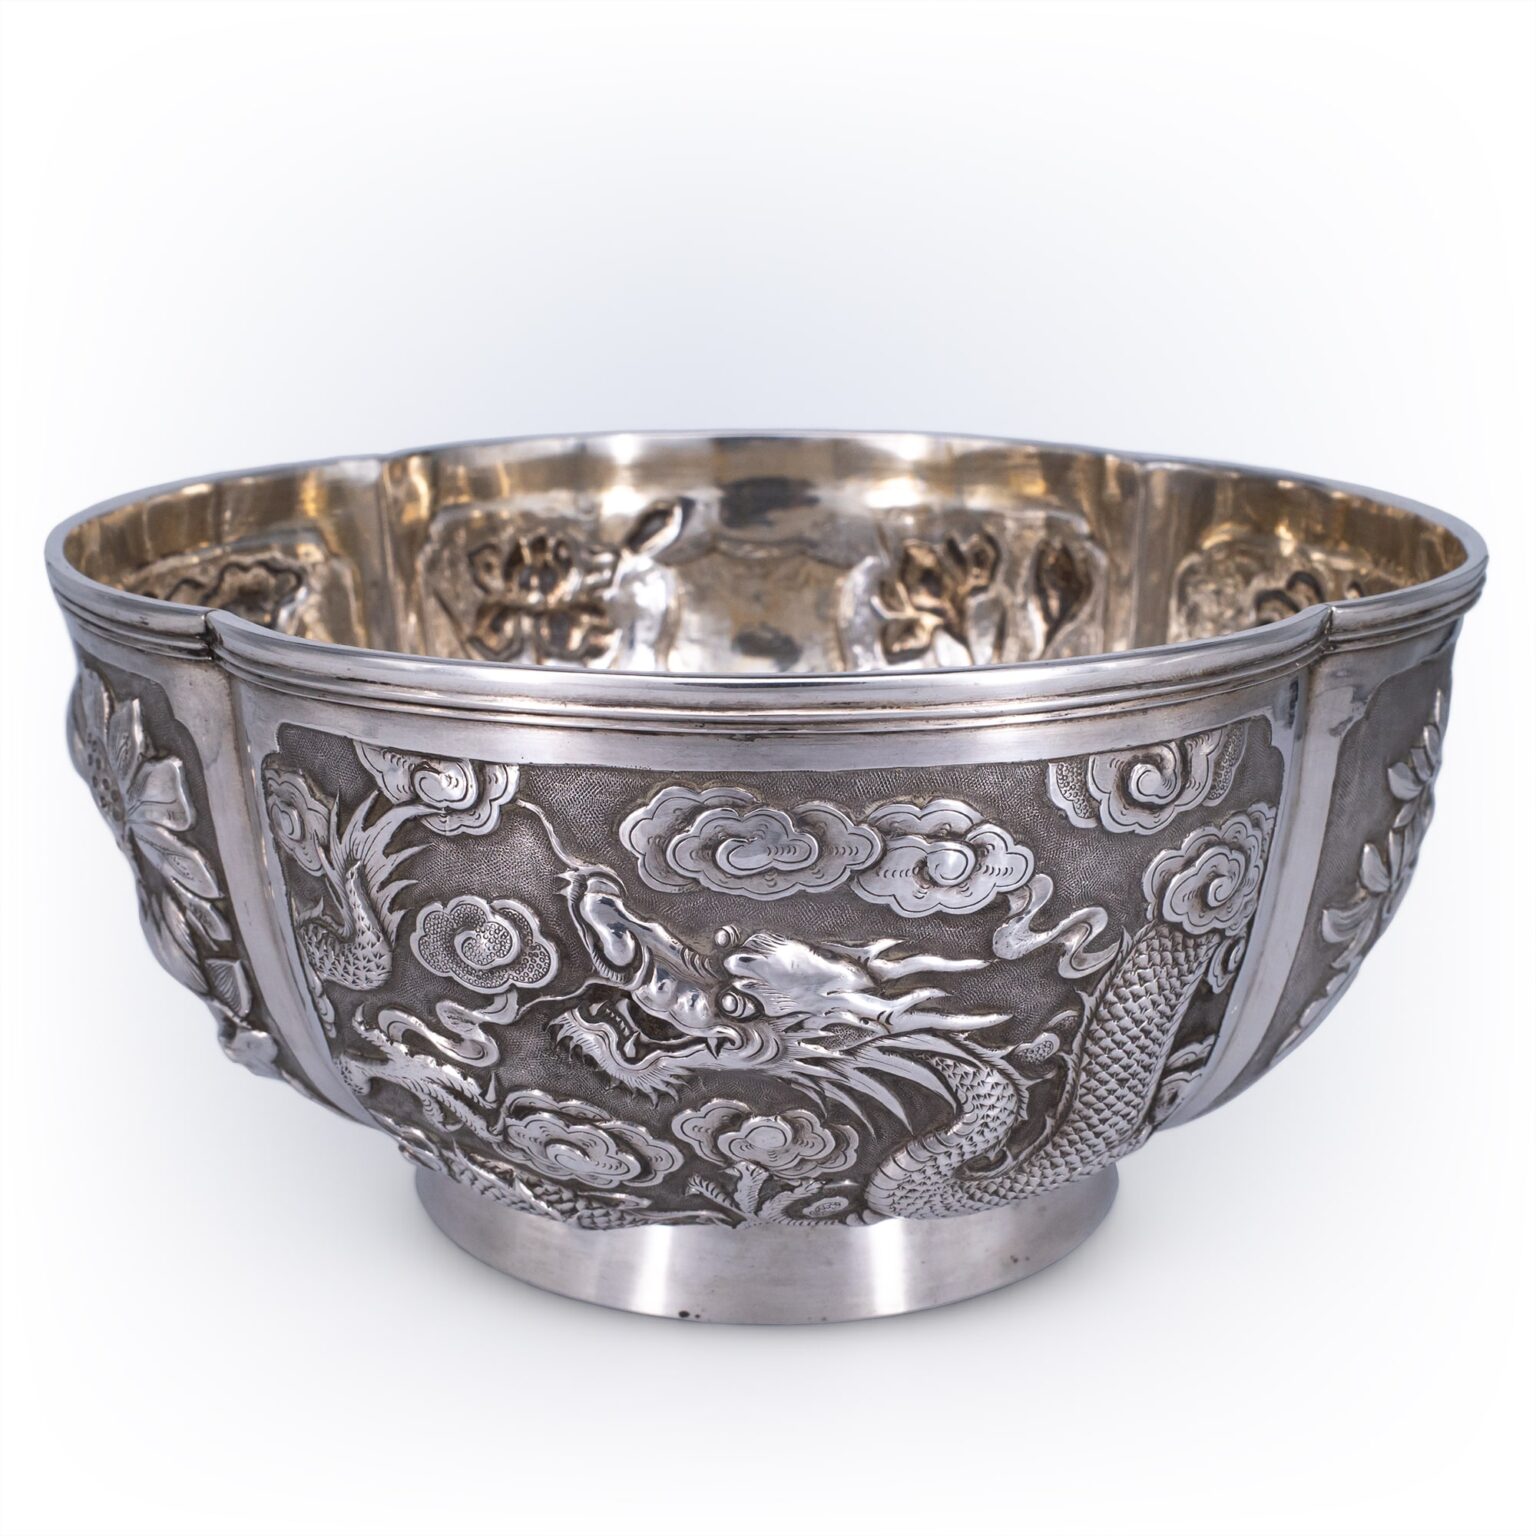 1 Chinese Export Silver Bowl Woshing Min 1536x1536 